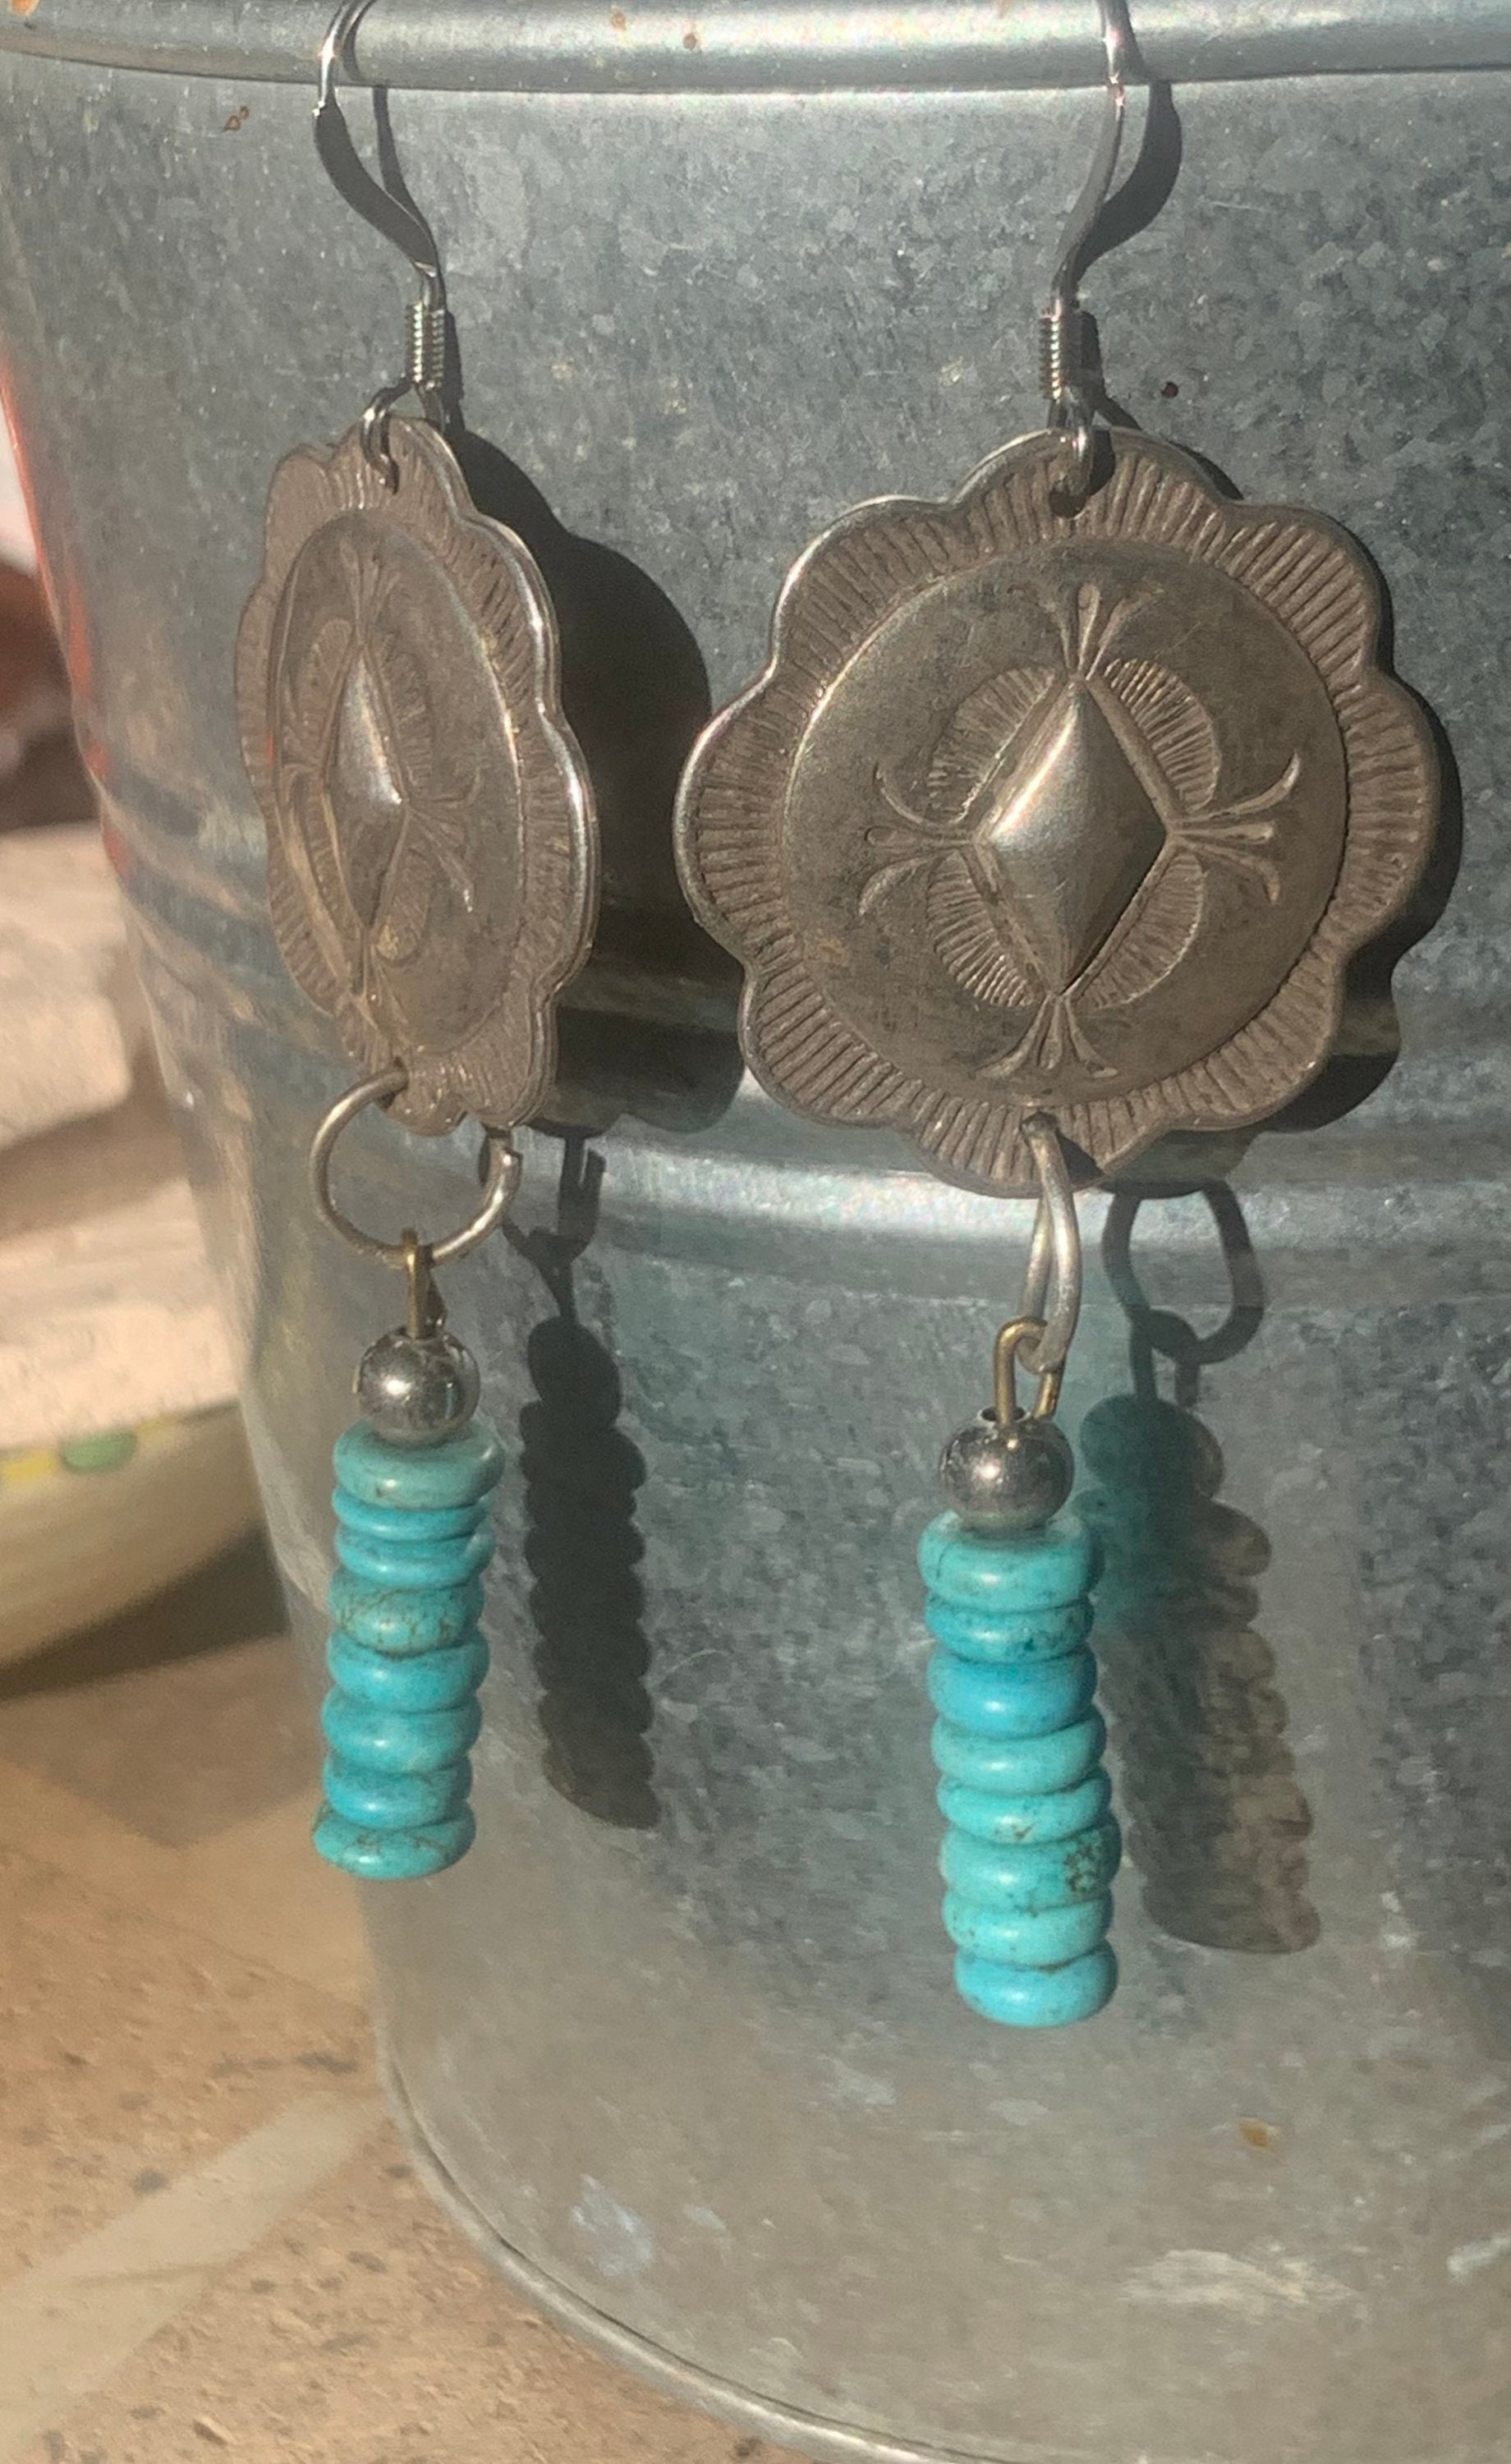 Concha earrings with dangling turquoise beads. | Etsy